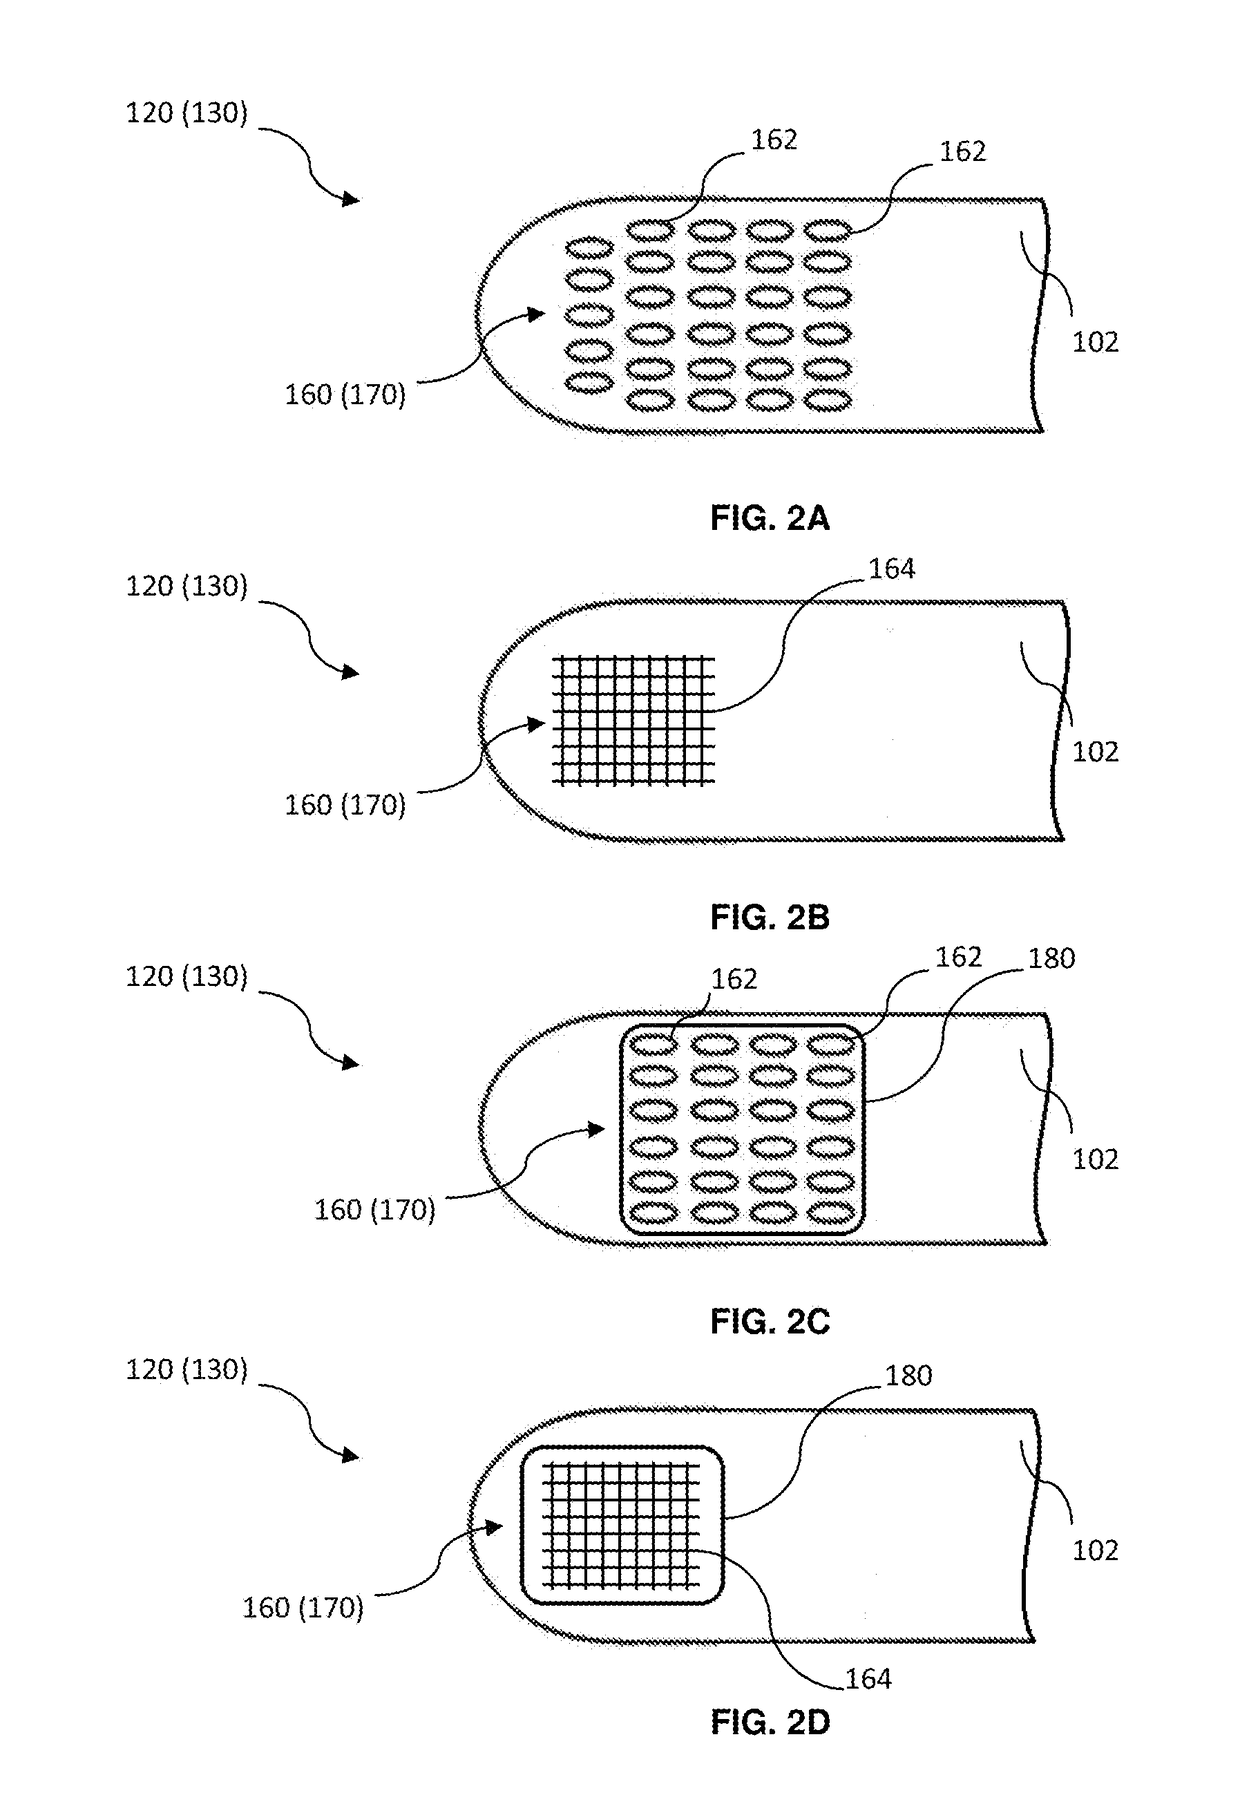 Grating device and method of operating same